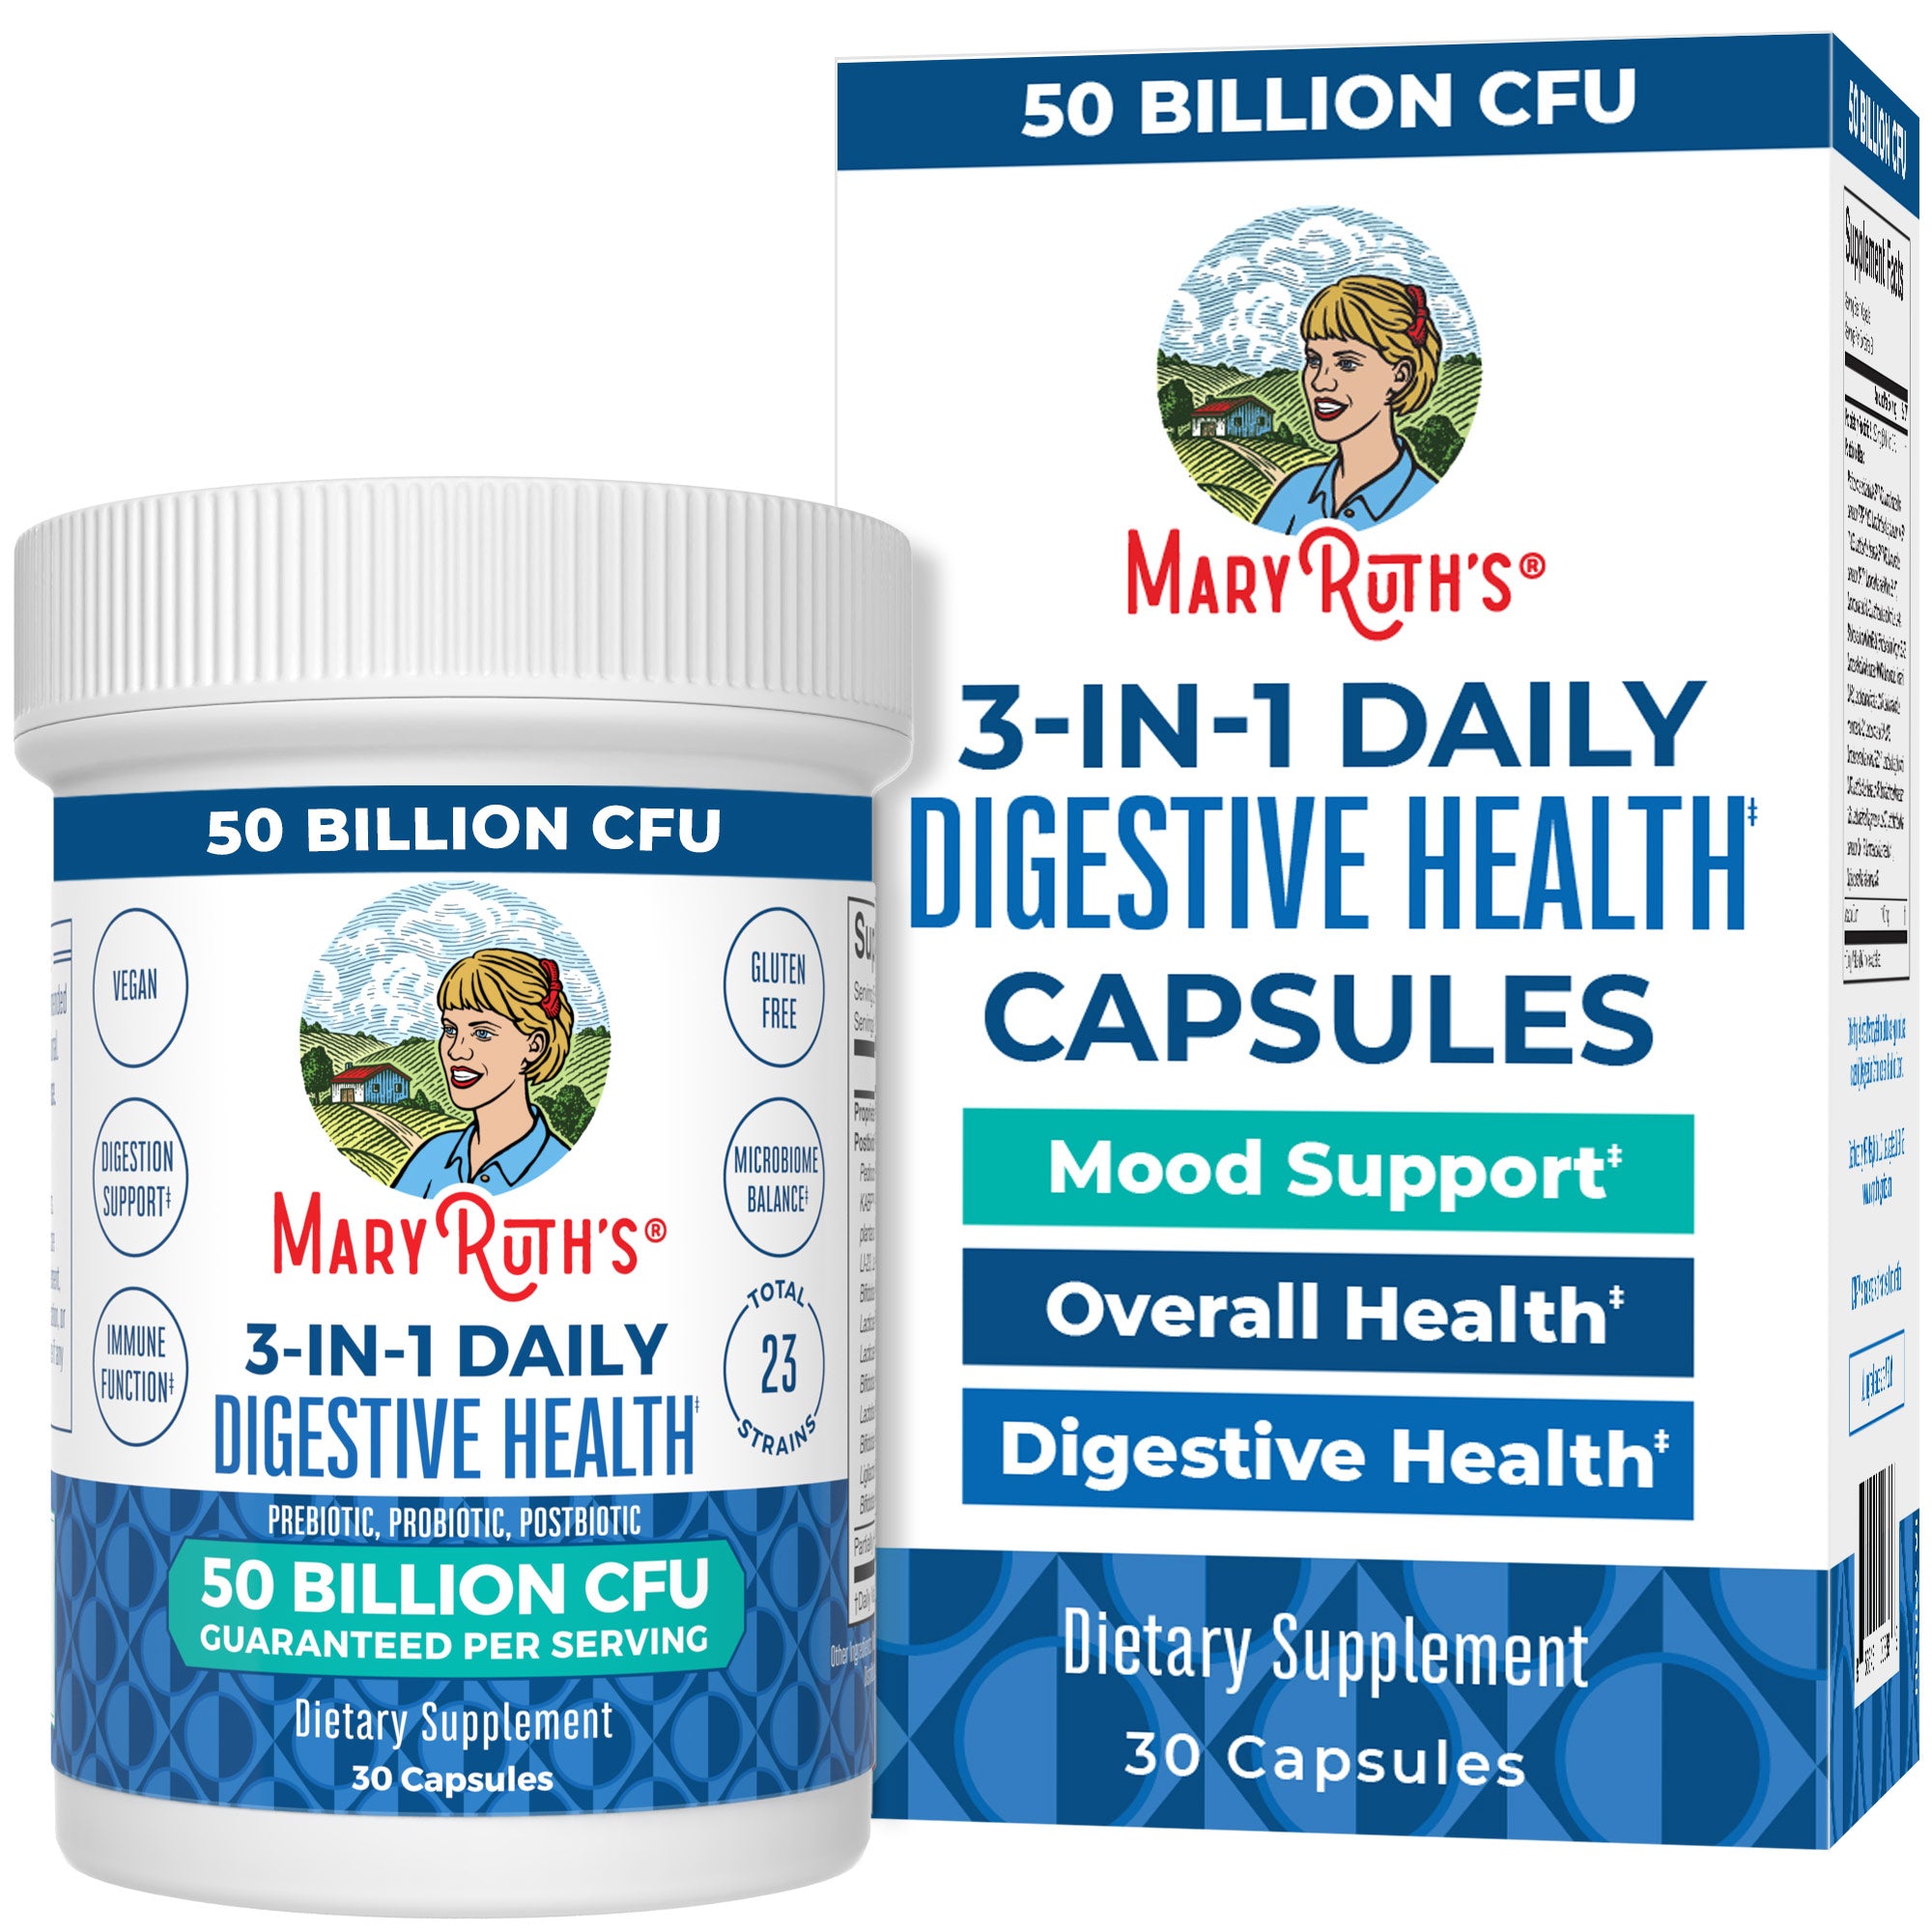 3-in-1 Daily Digestive Health Capsules